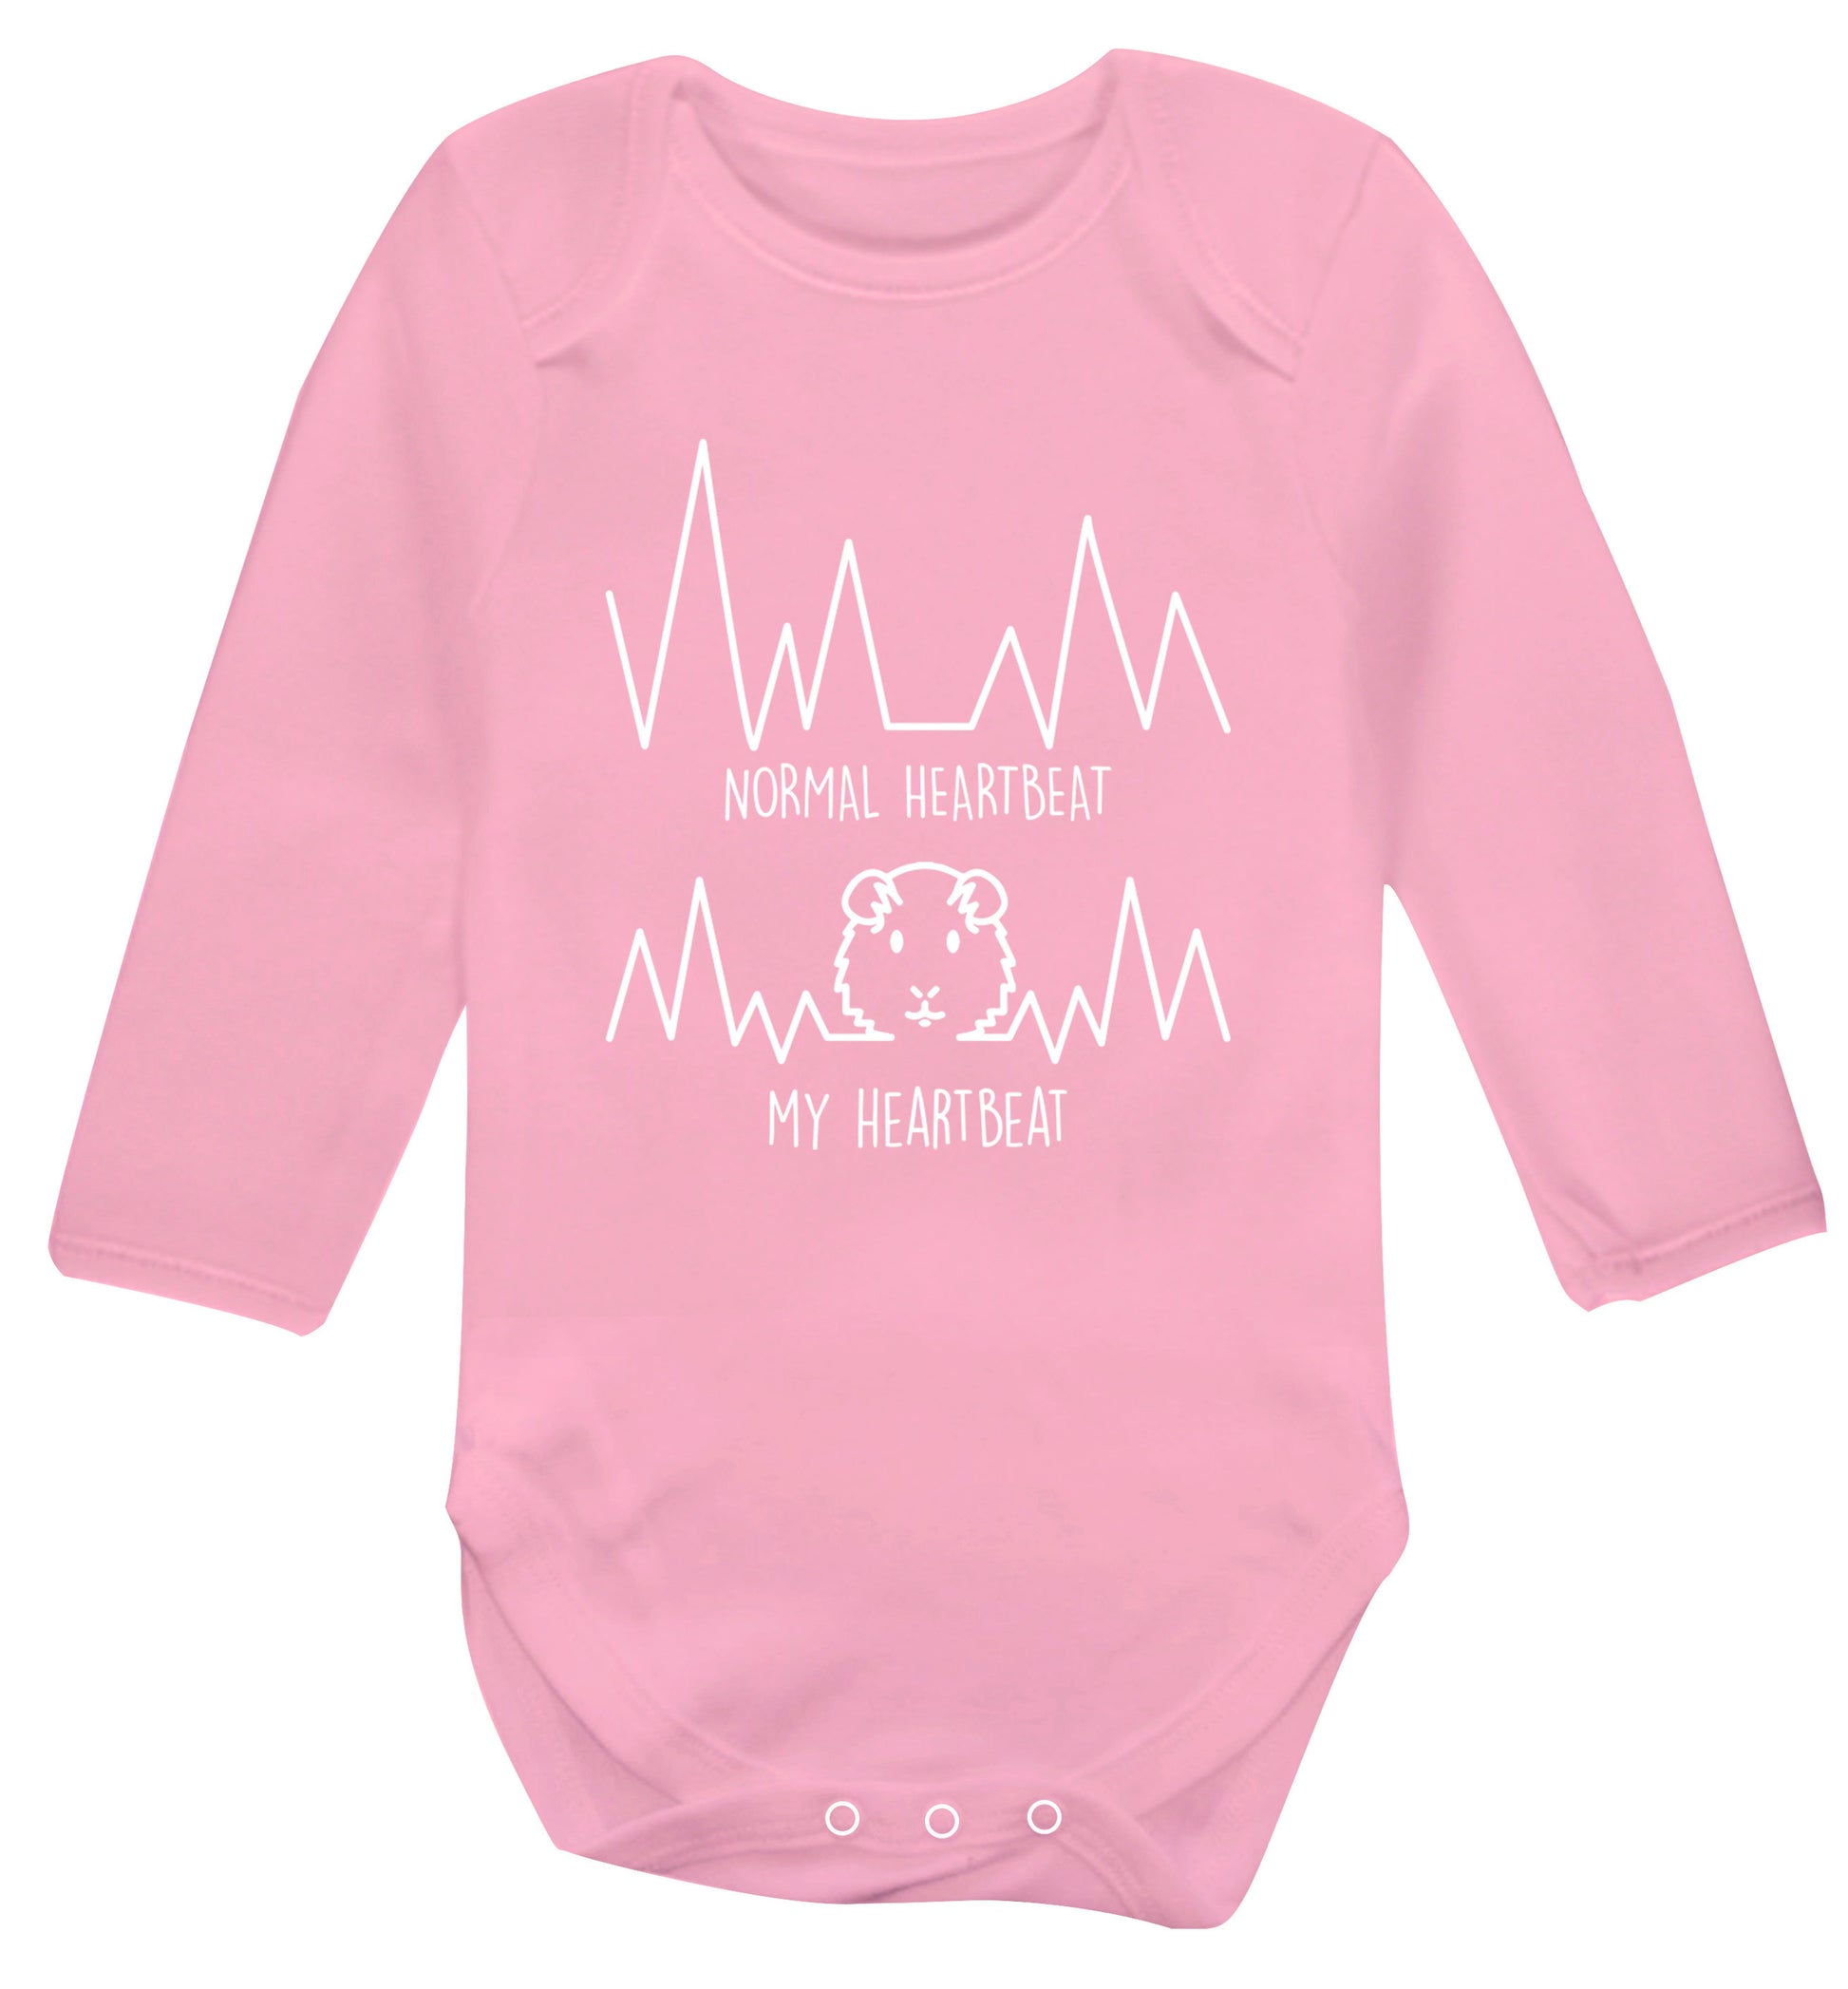 Normal heartbeat vs my heartbeat guinea pig lover Baby Vest long sleeved pale pink 6-12 months